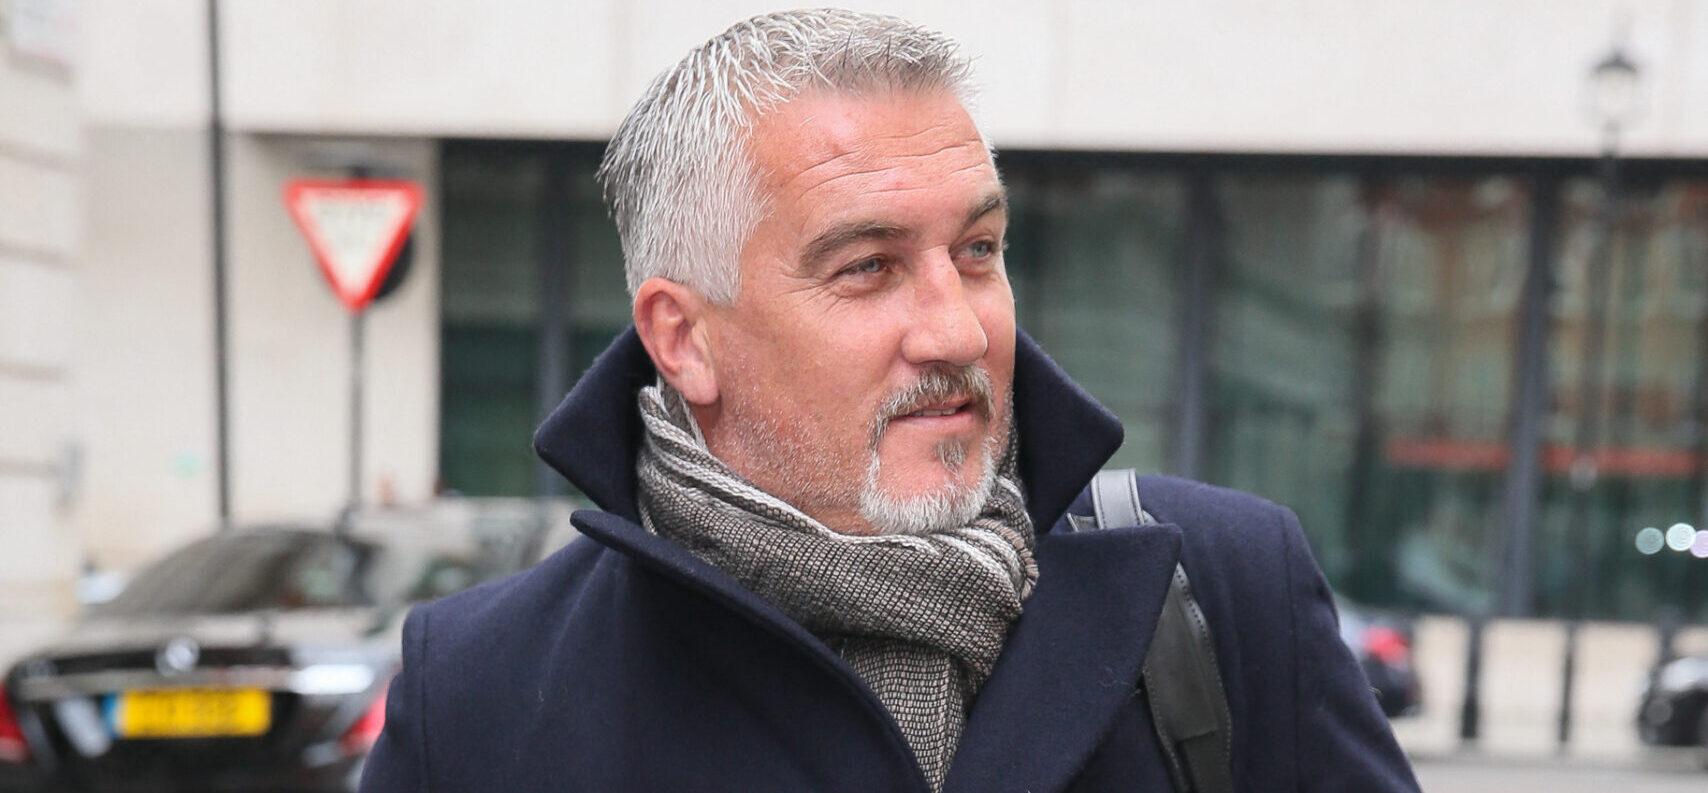 ‘Great British Bake Off’ Star Paul Hollywood Says This Famous American Junk Food Is ‘Awful’